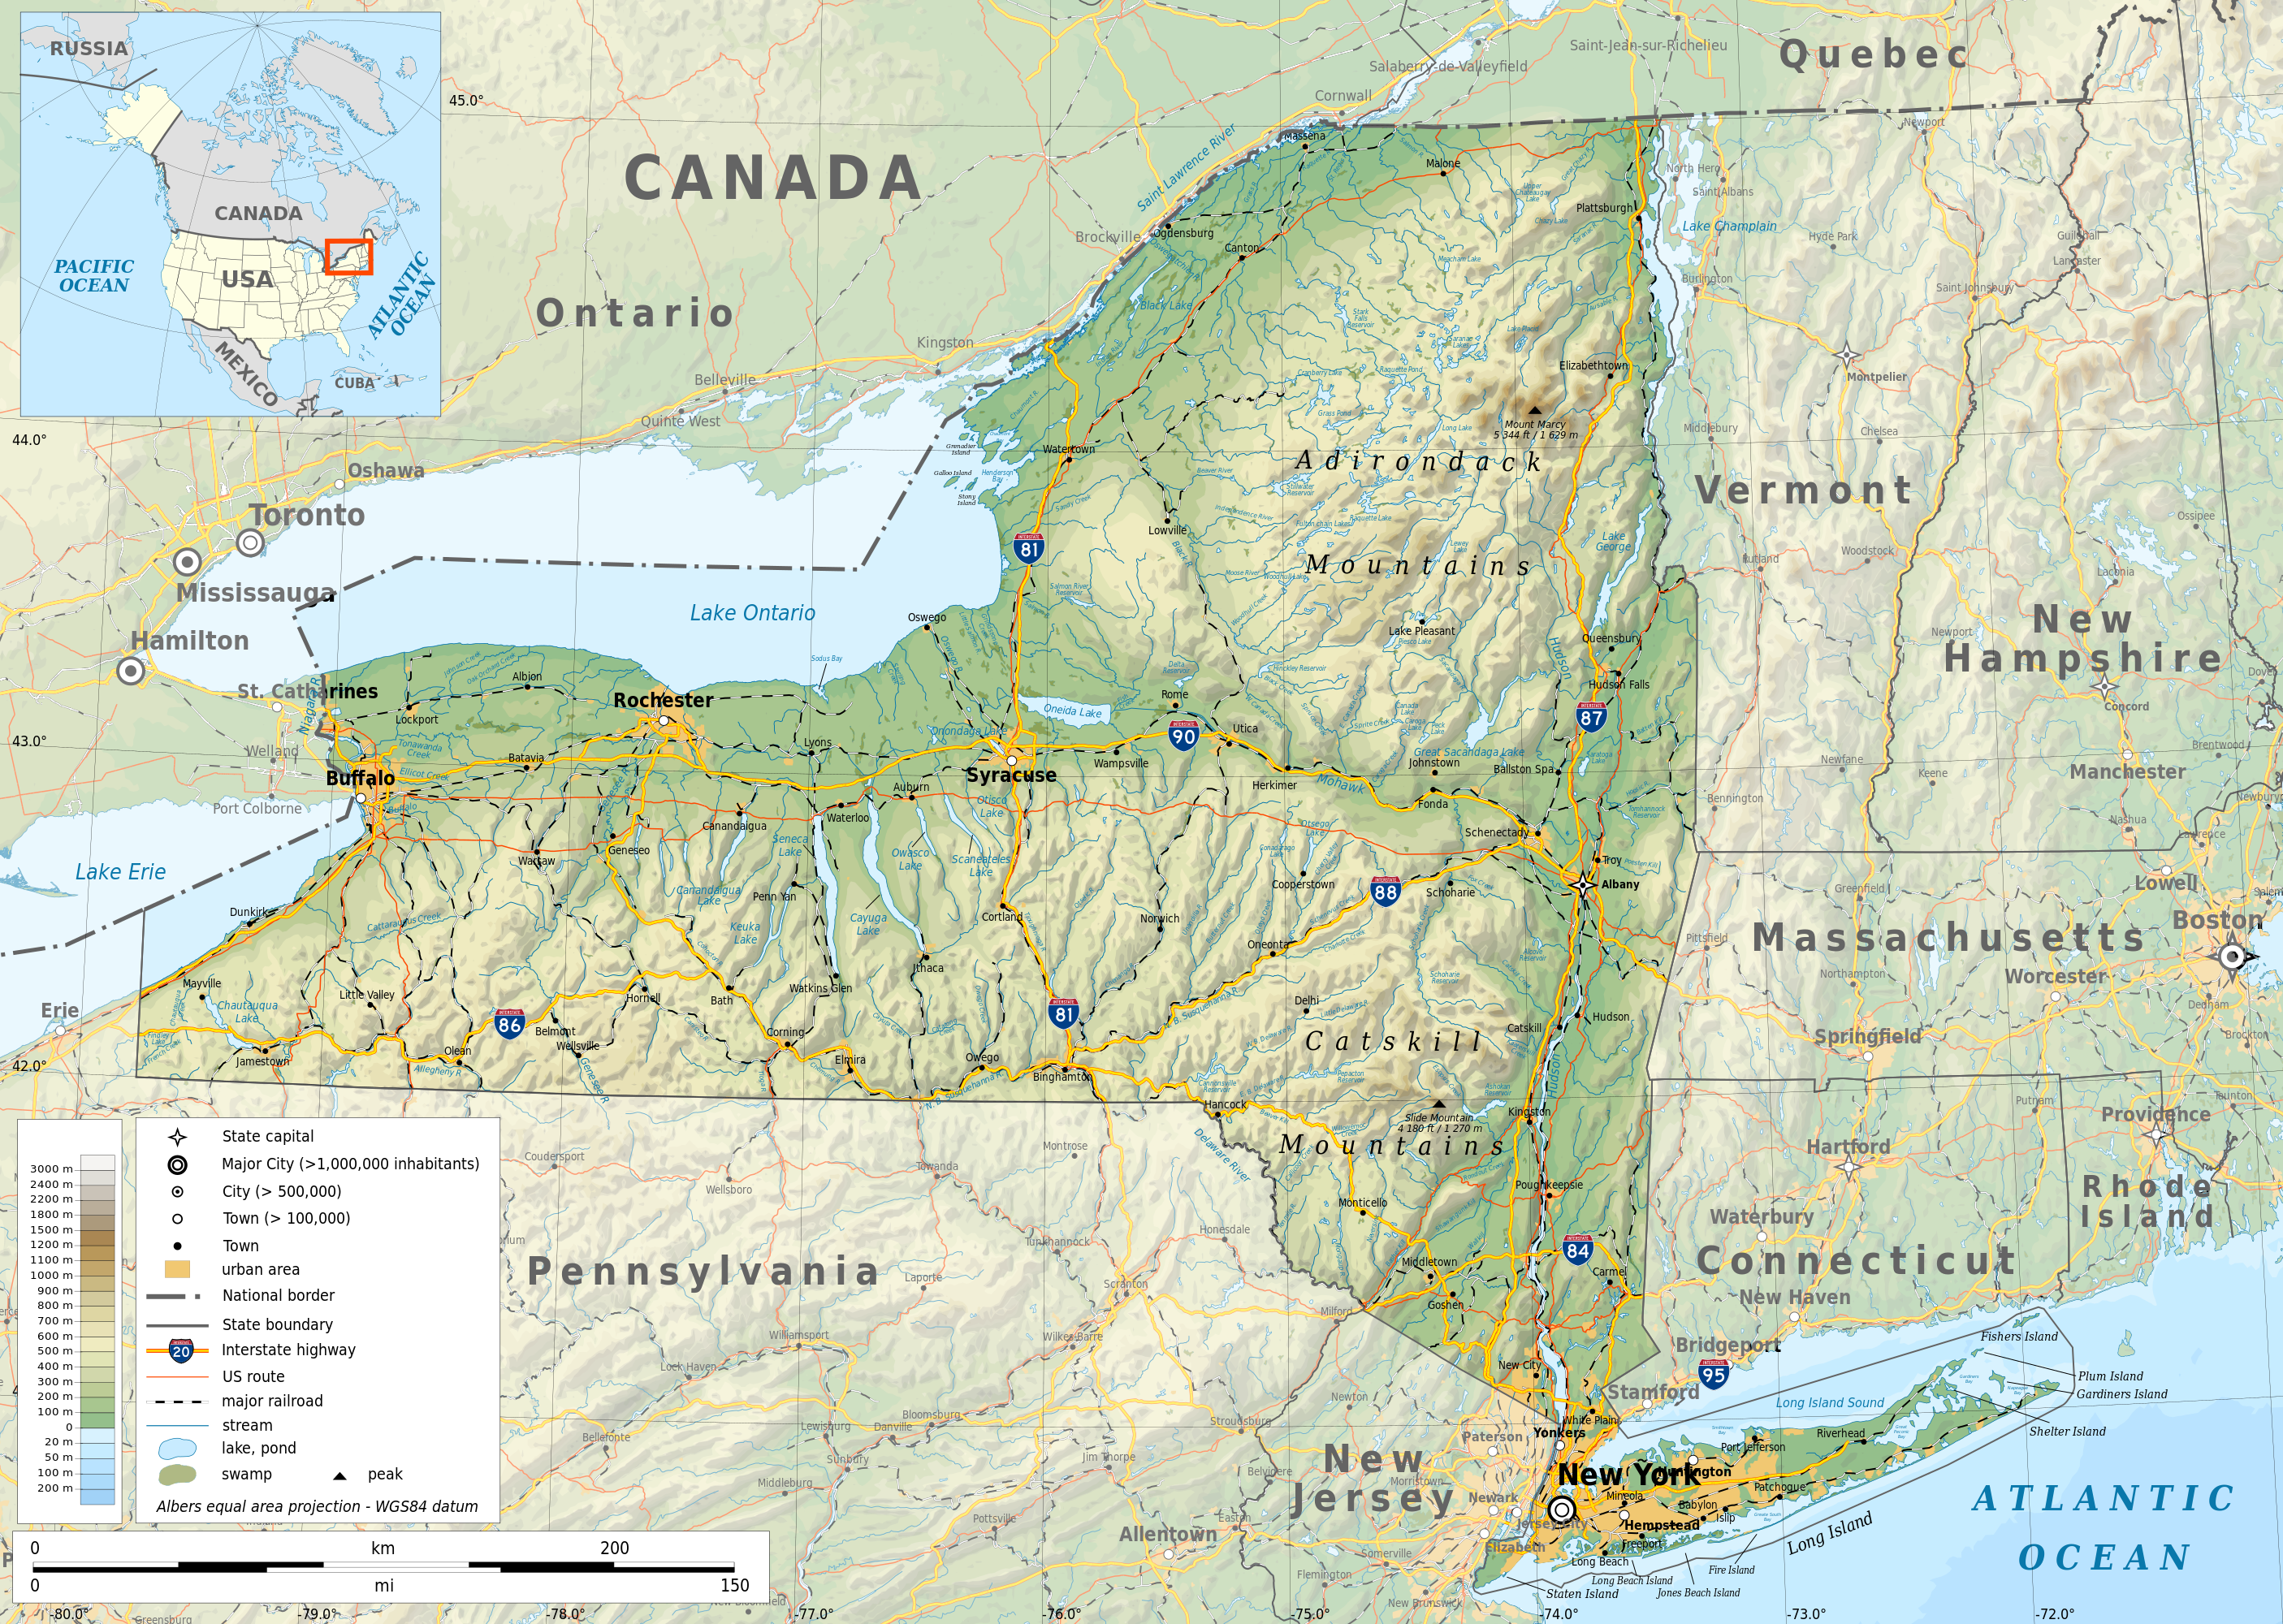 Geographic Map Of New York File:New York state geographic map en.svg   Wikimedia Commons